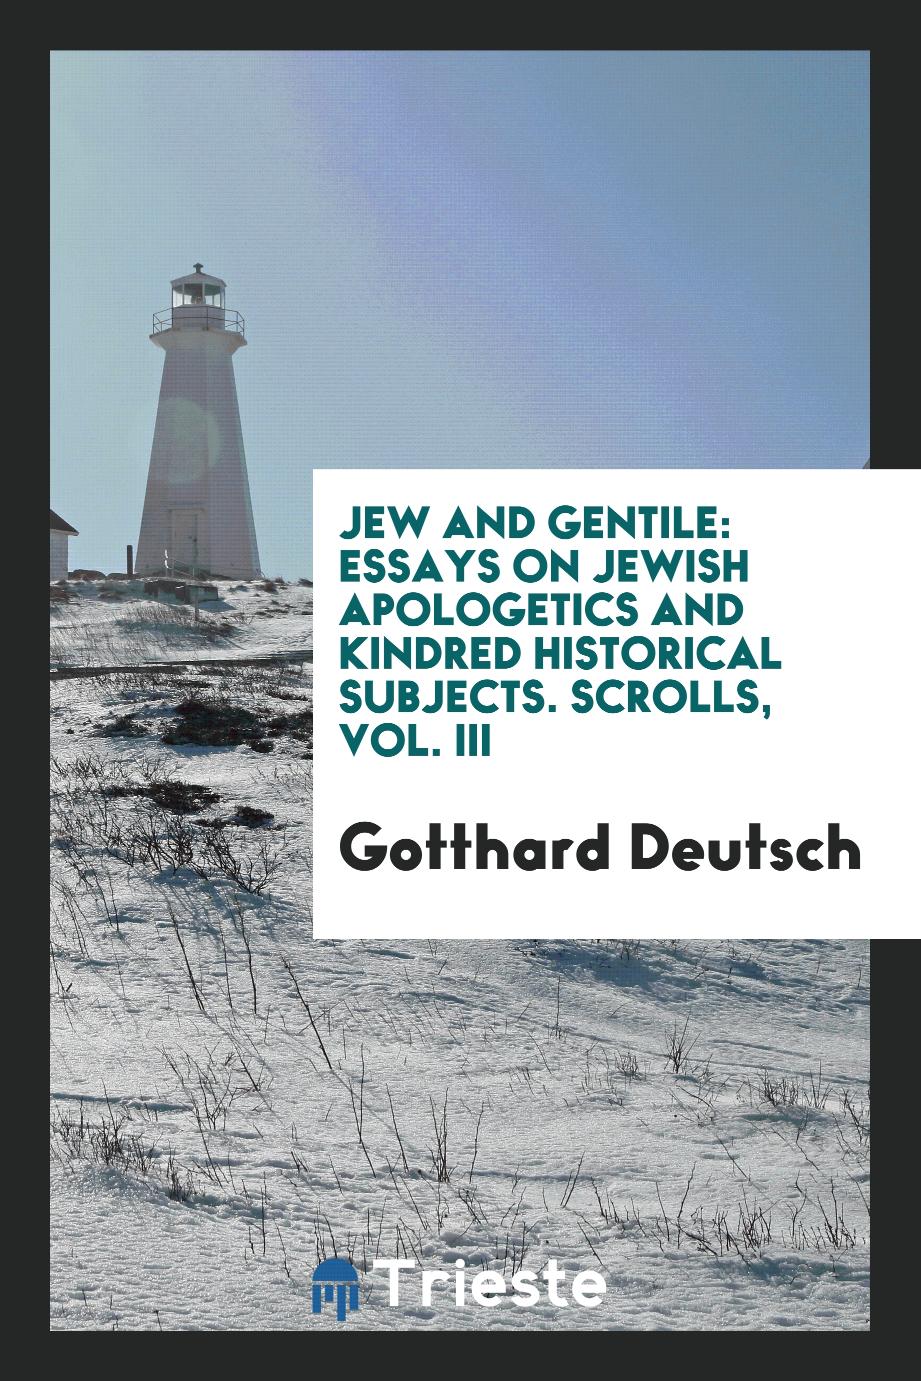 Jew and Gentile: Essays on Jewish Apologetics and Kindred Historical Subjects. Scrolls, Vol. III